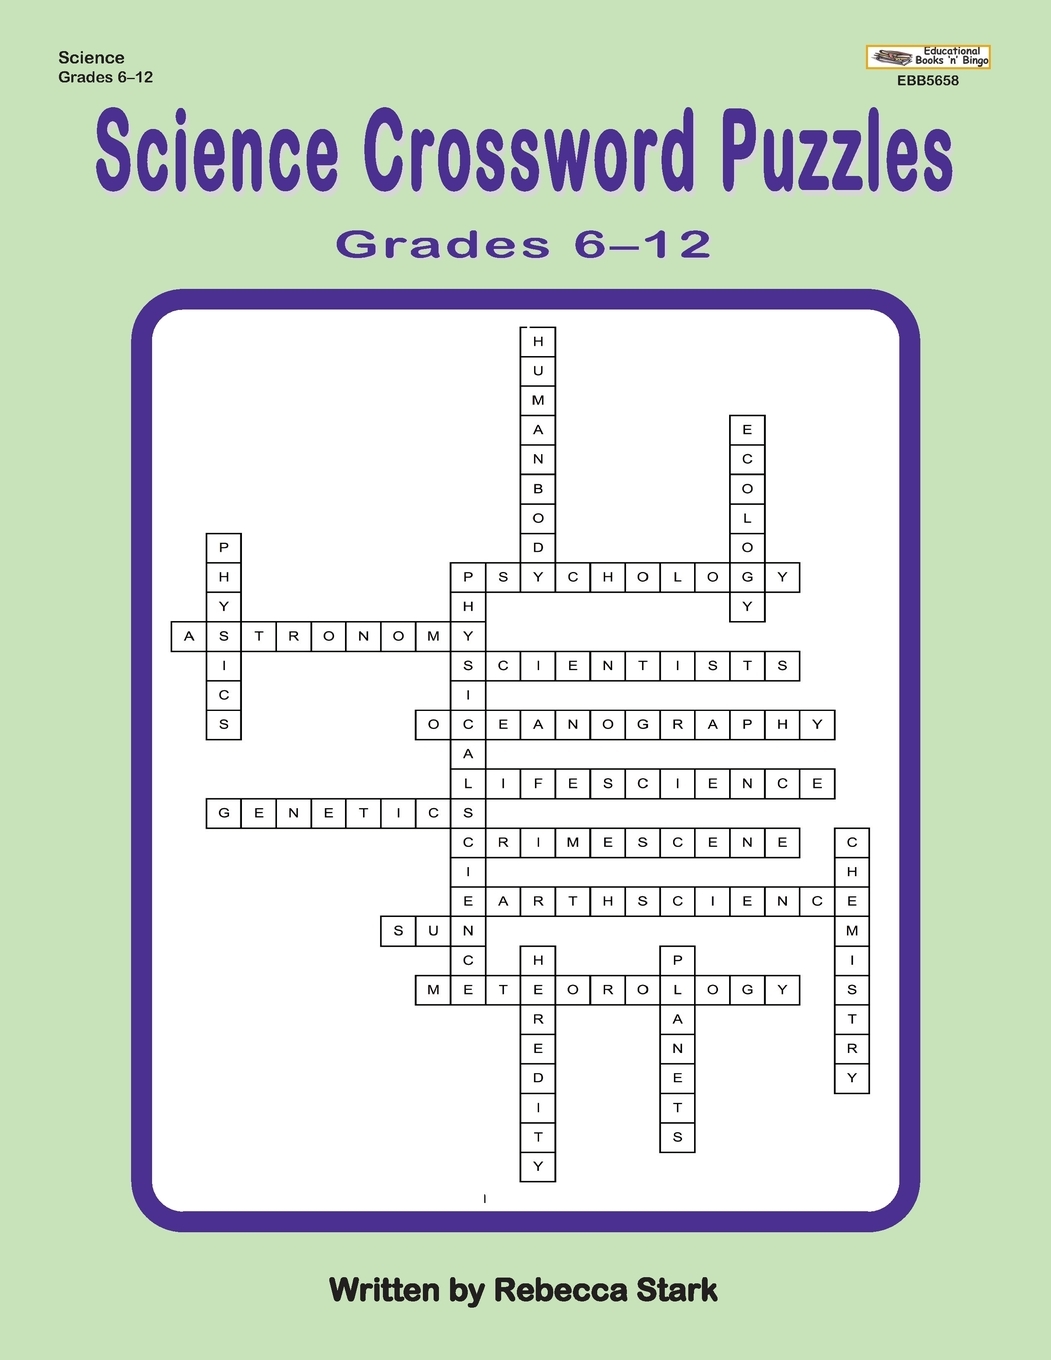 Crossword Puzzles For The Classroom Series   Science